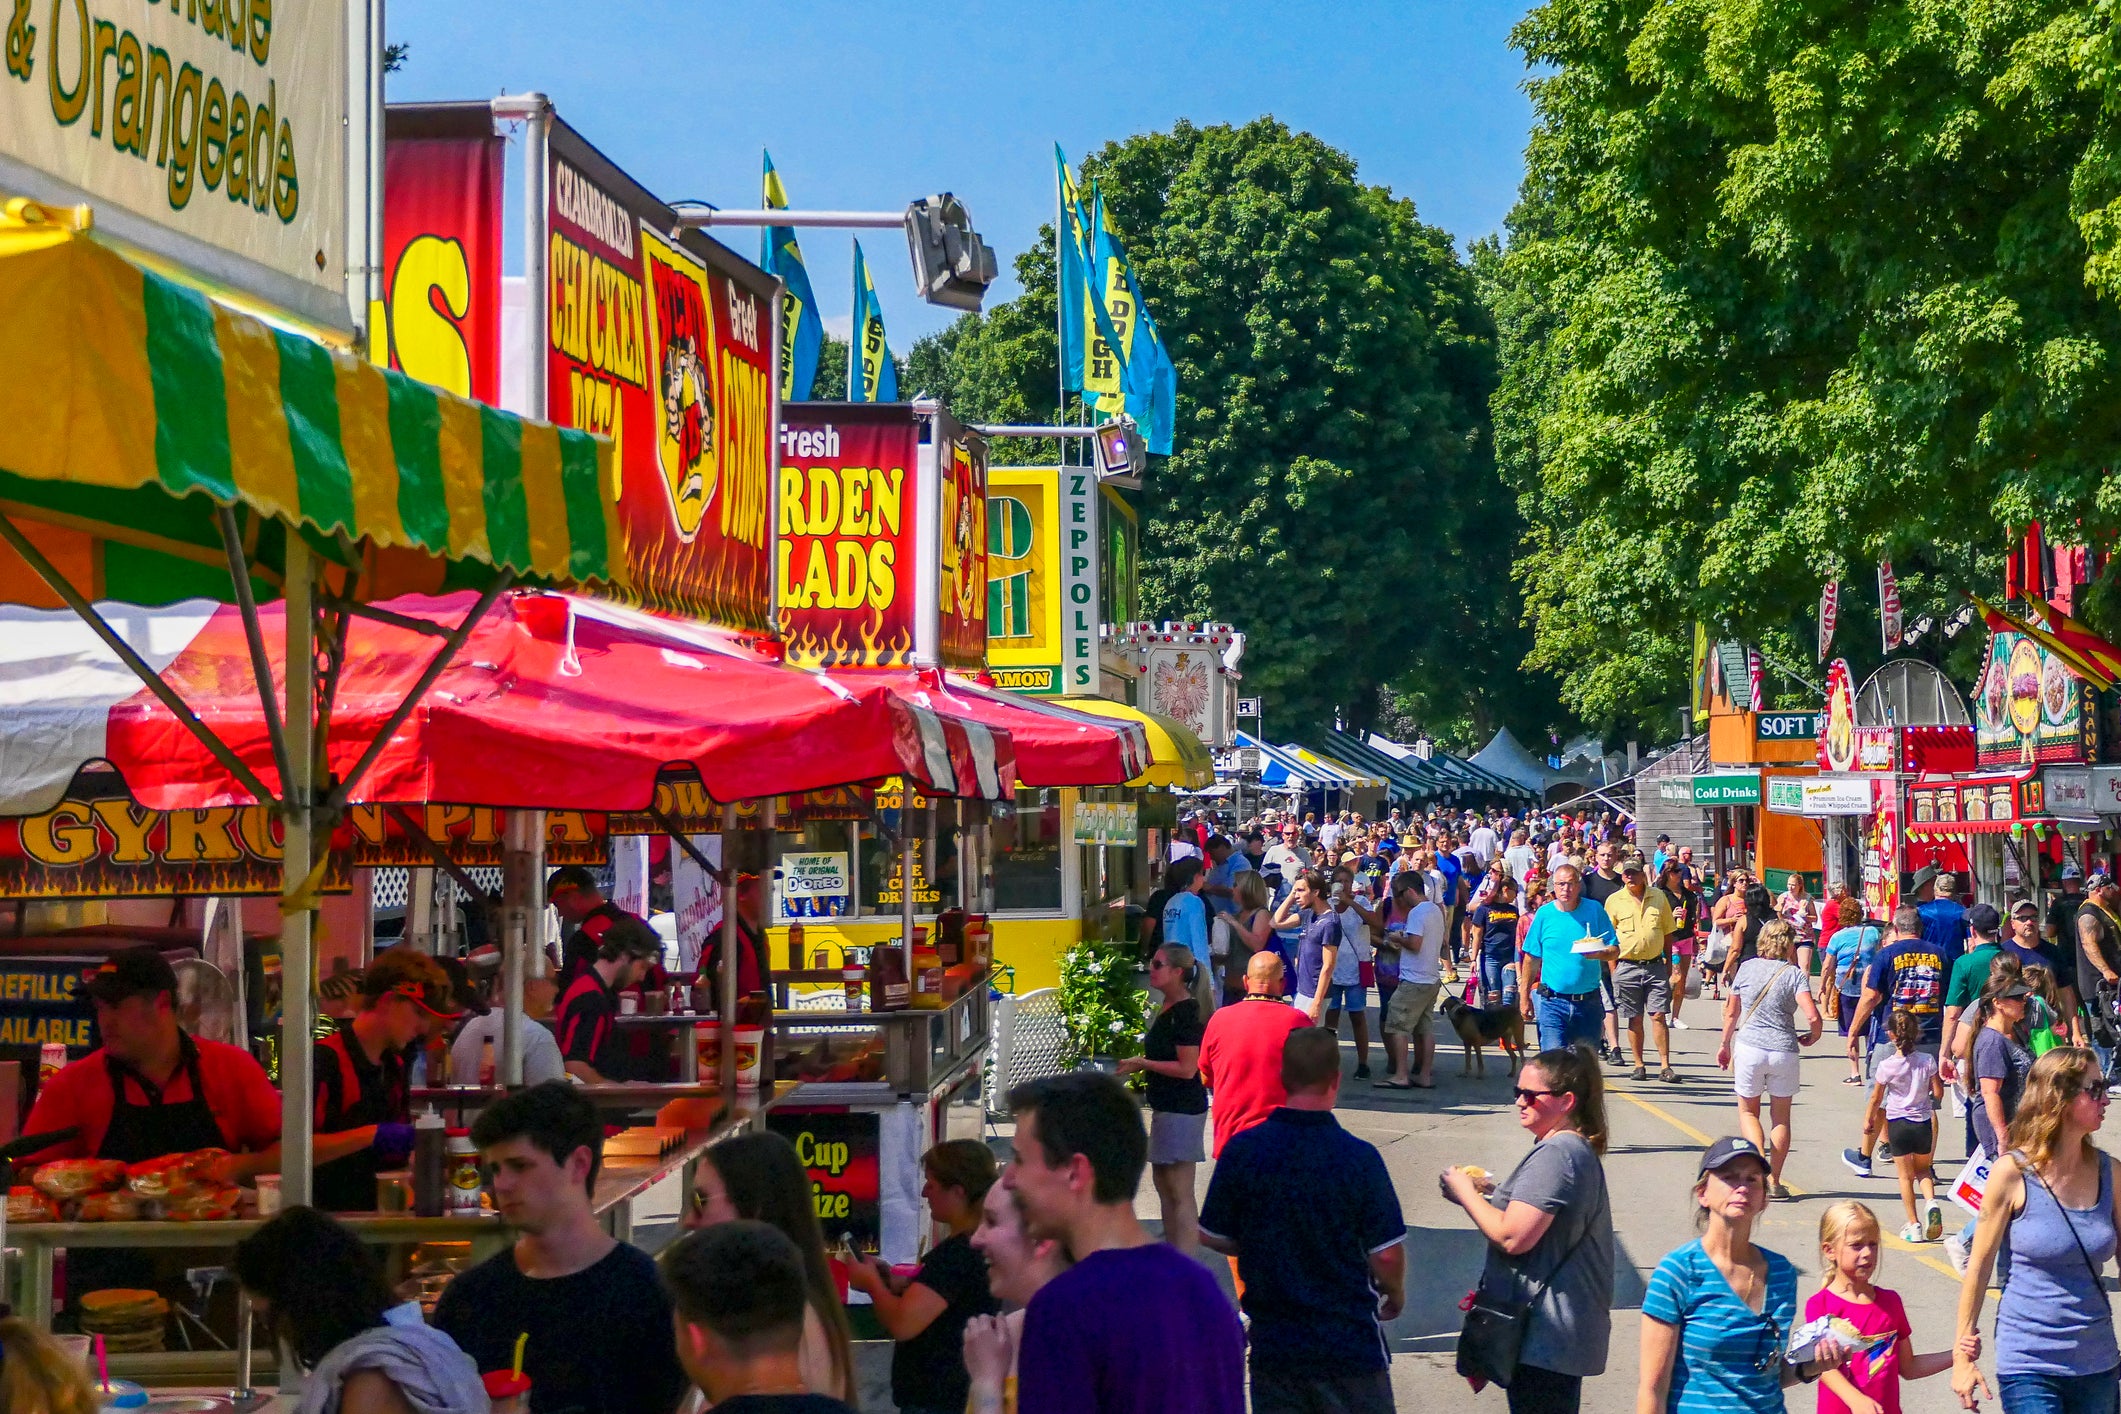 Rhinebeck is famous for its farmer’s markets and fairs